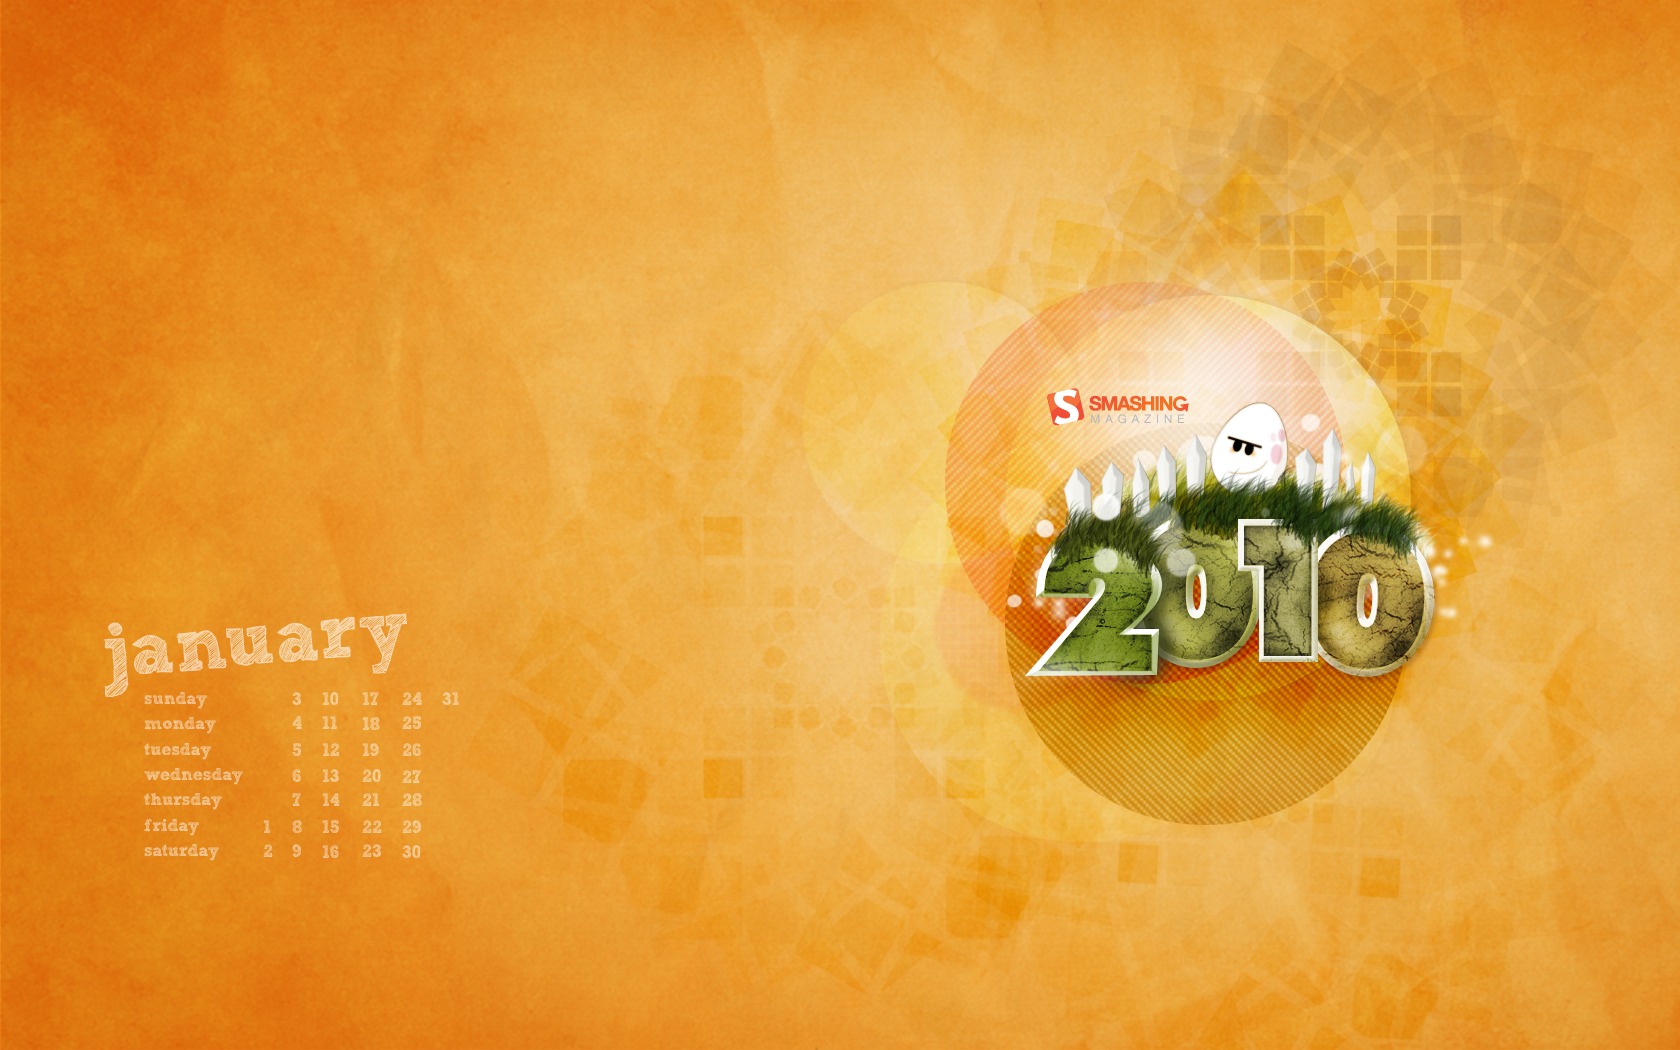 Microsoft Official Win7 Neujahr Wallpapers #8 - 1680x1050